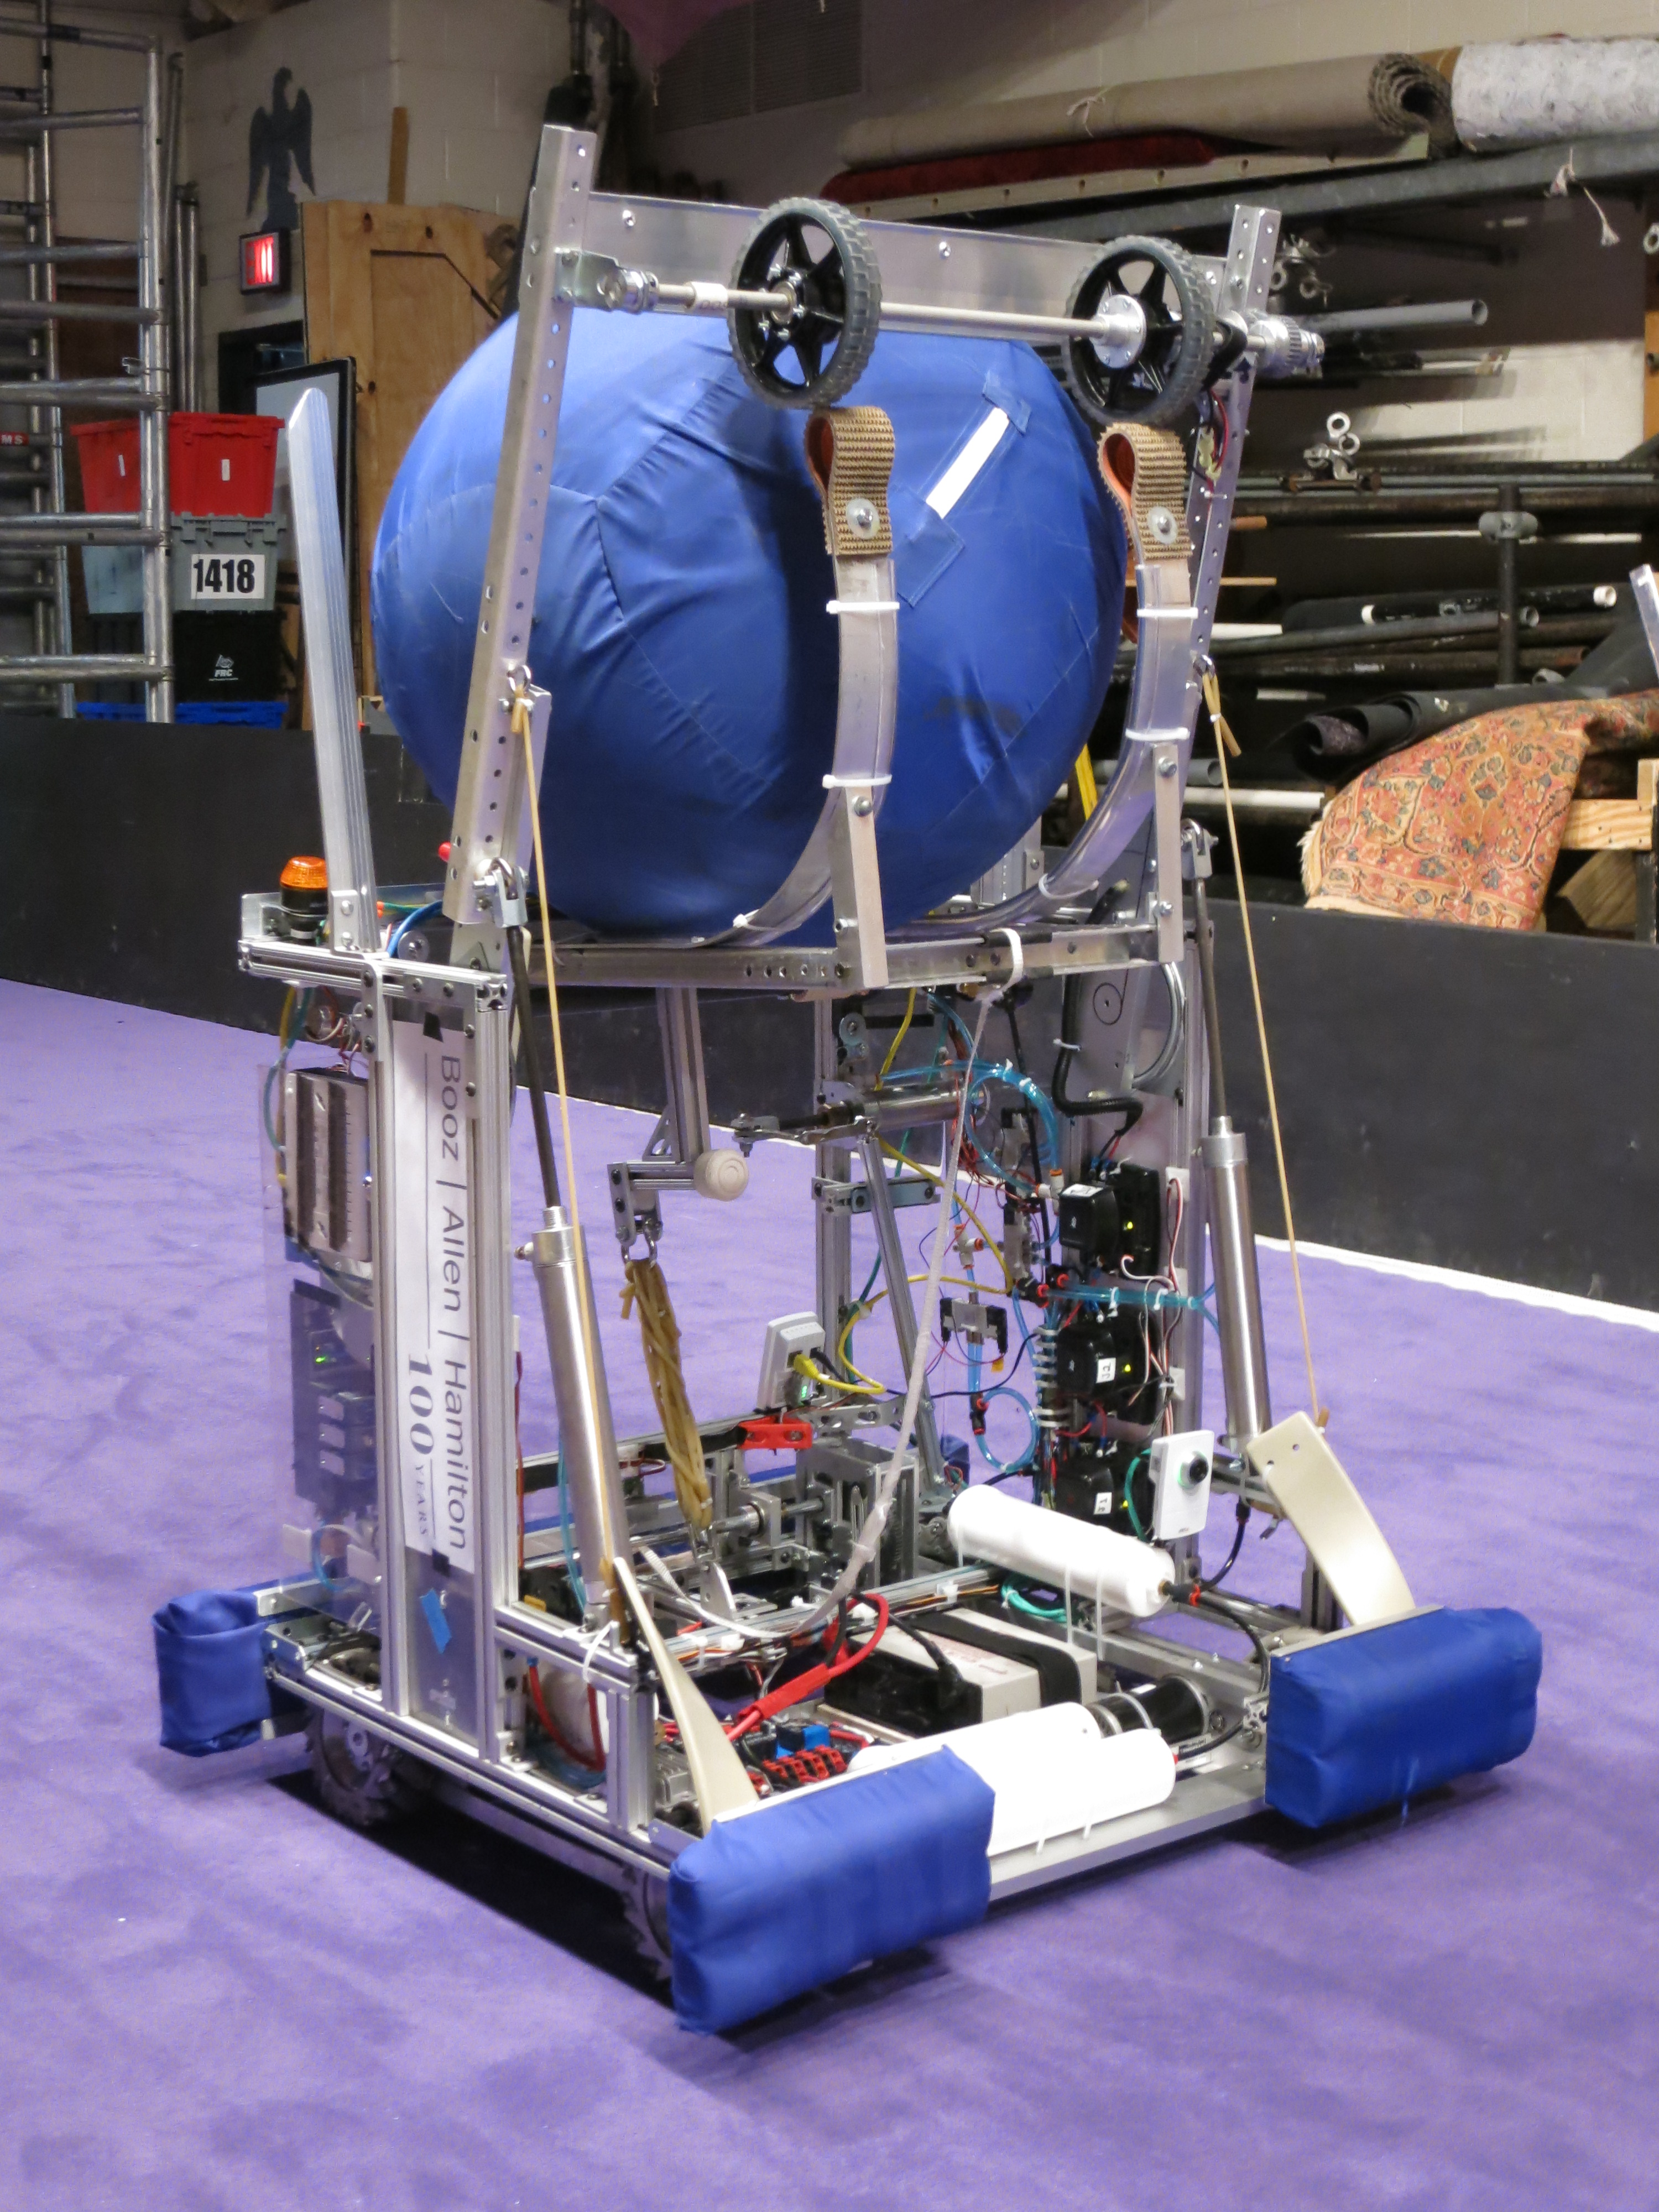 The 2014 robot with a catapult.